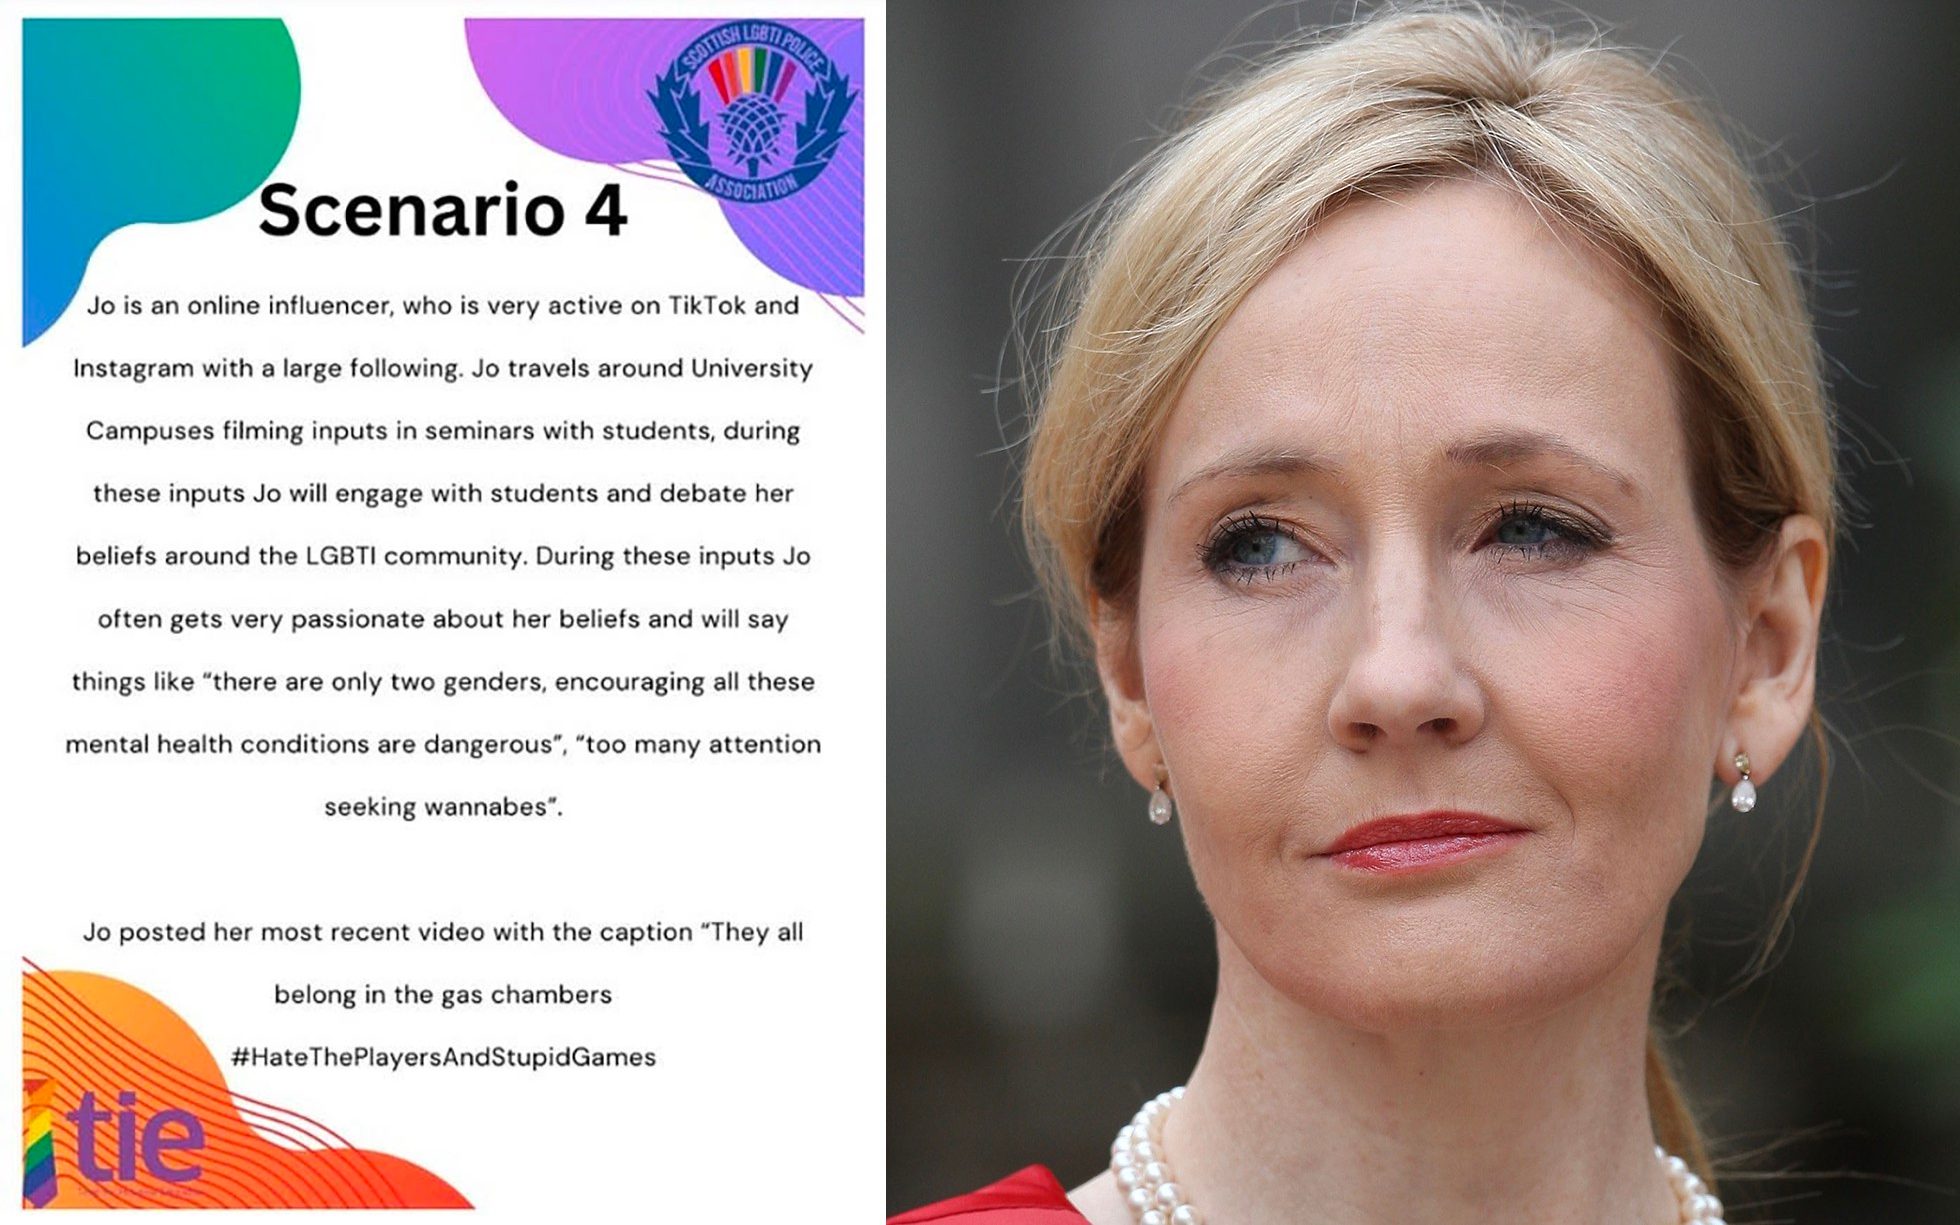 jk rowling stunt ‘shows police scotland can’t be trusted to apply hate crime laws’